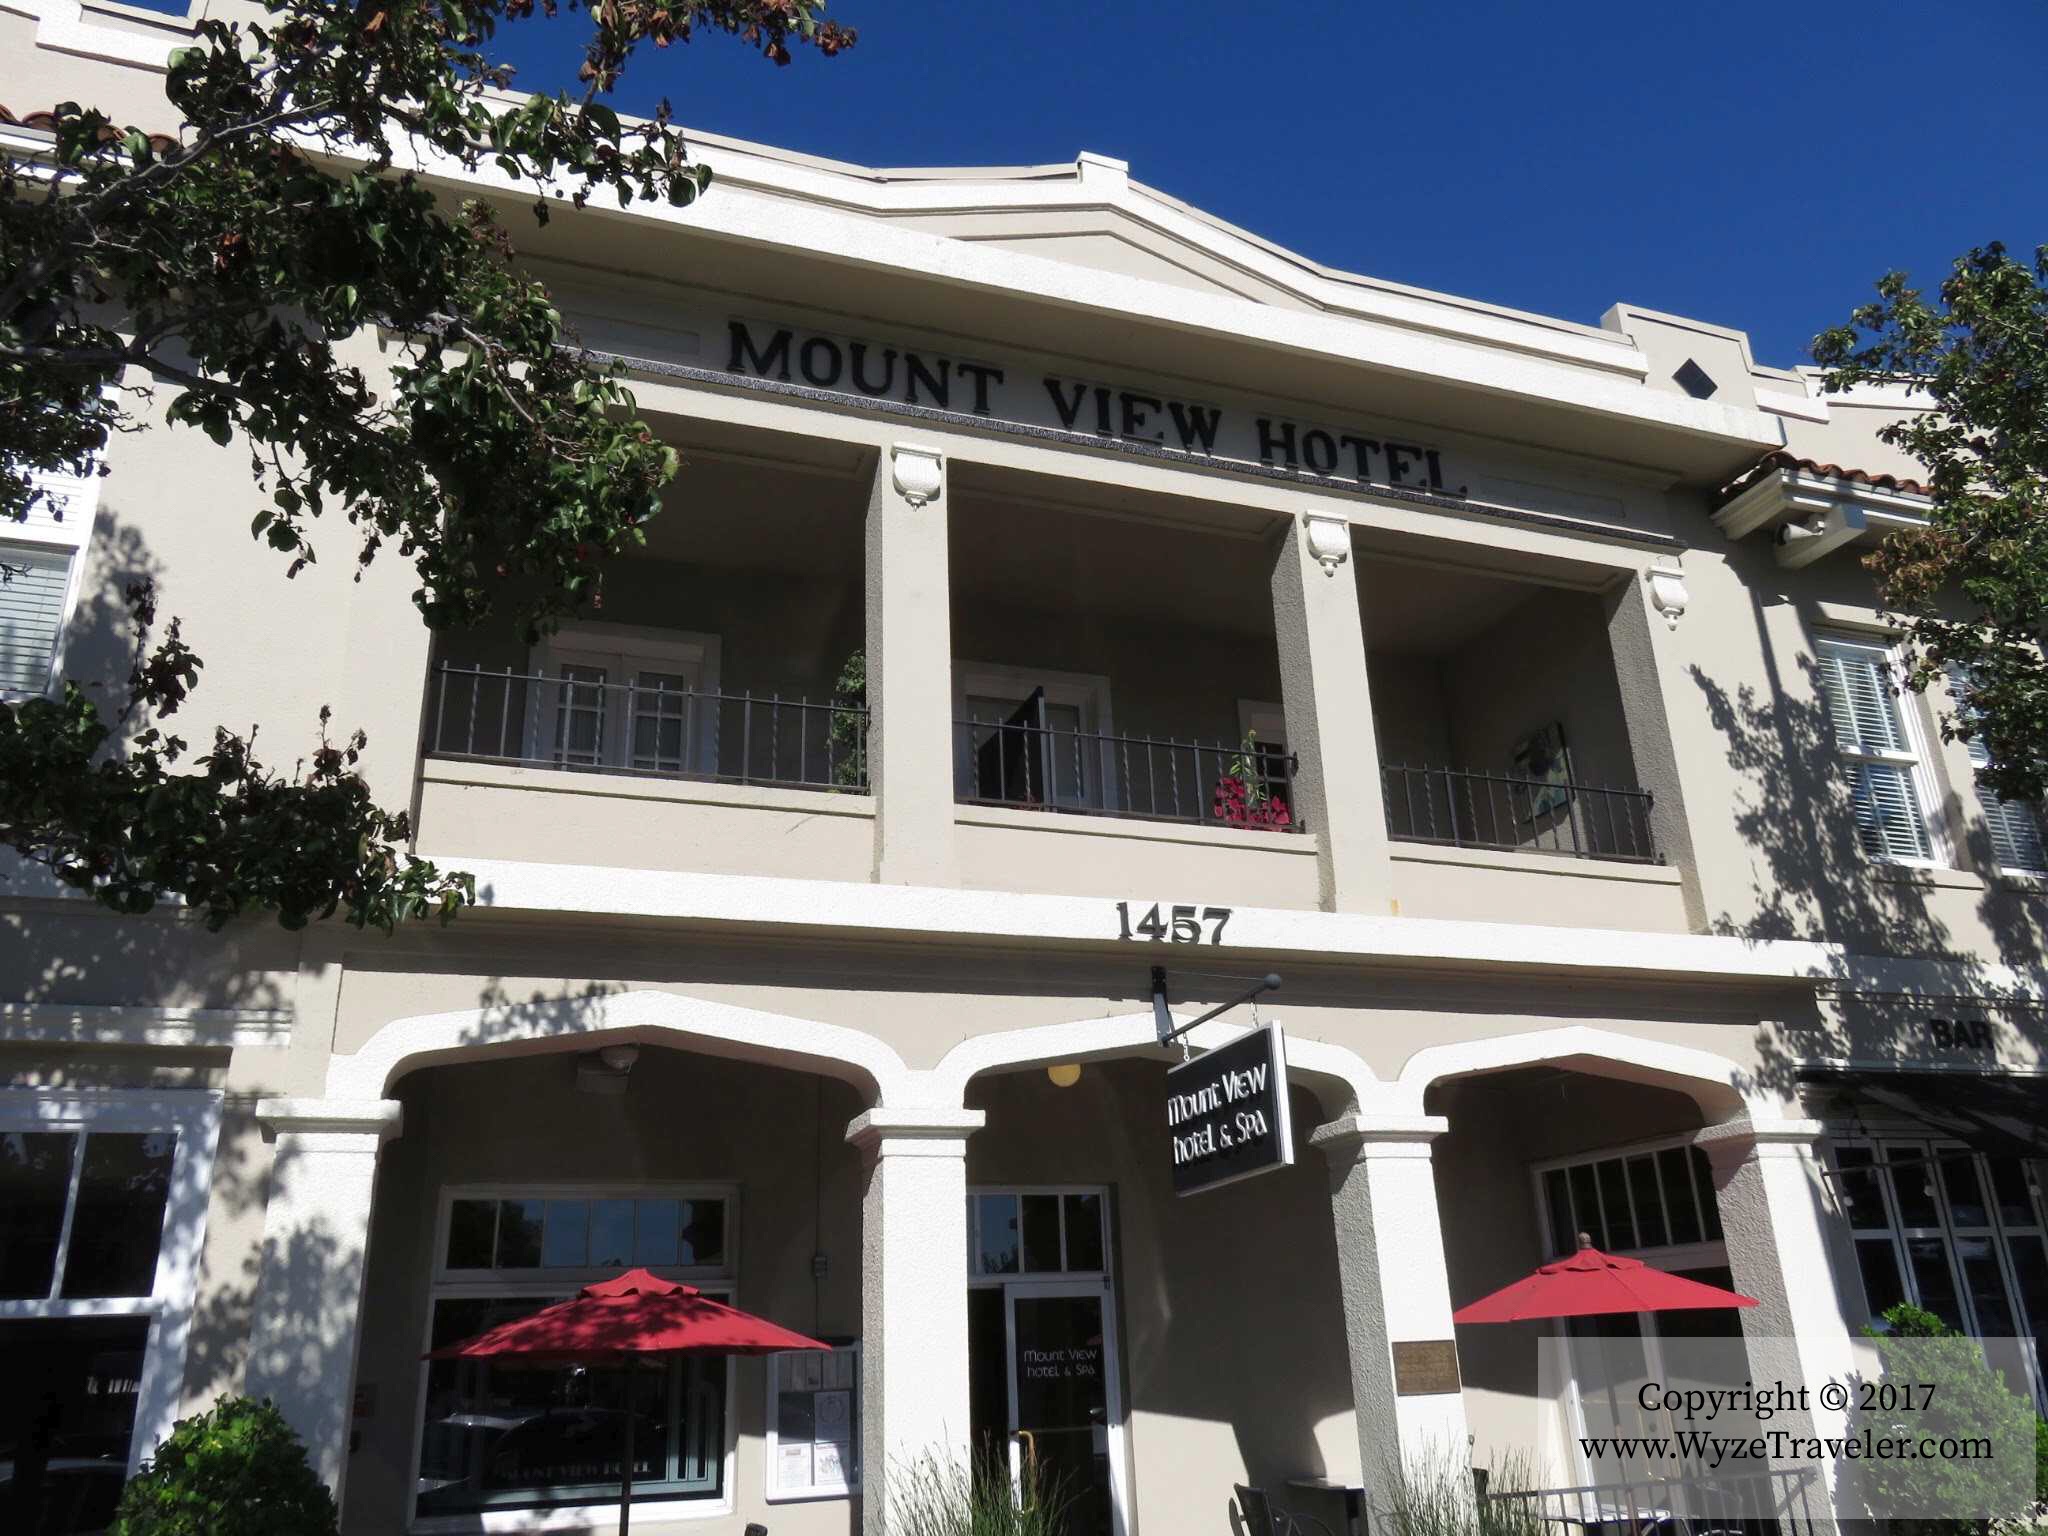 Mount View Hotel & Spa